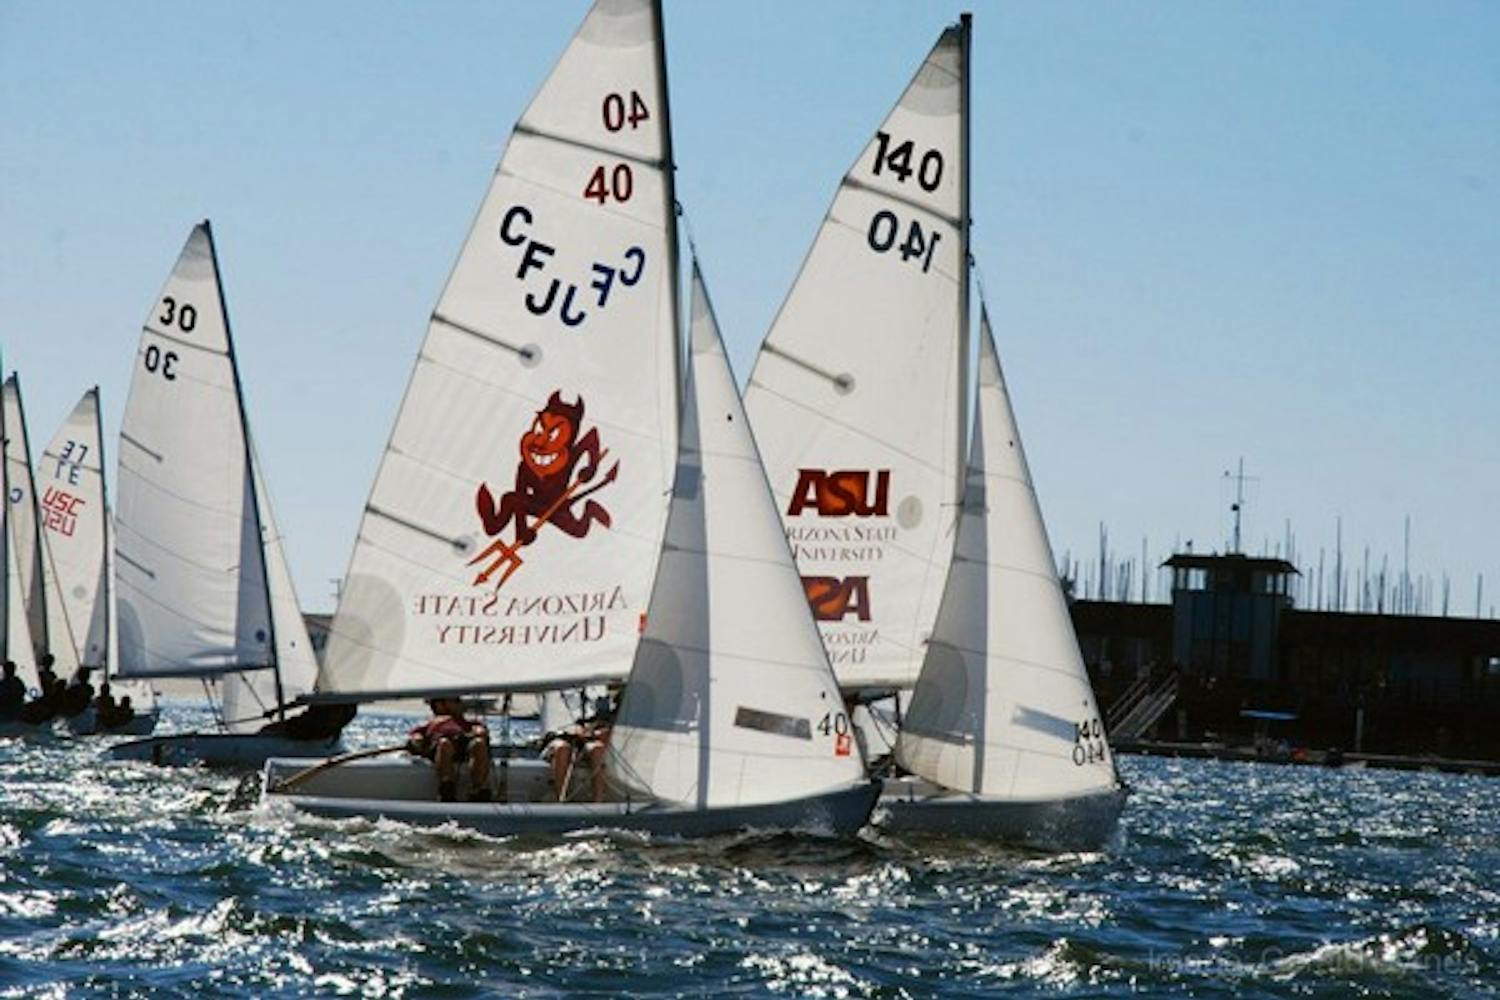 SAILING SAN DIEGO: Junior Mike Garrigan and freshman Chad Hardgrove of the ASU Sailing Club Club sail upwind to the windward mark during the Frosh/Soph Regatta in Mission Bay, San Diego on Oct. 9. The Arizona State University Sailing Club varsity boat placed fourth in the Frosh/Soph Regatta. (Photo courtesy of Gerald Byrnes)